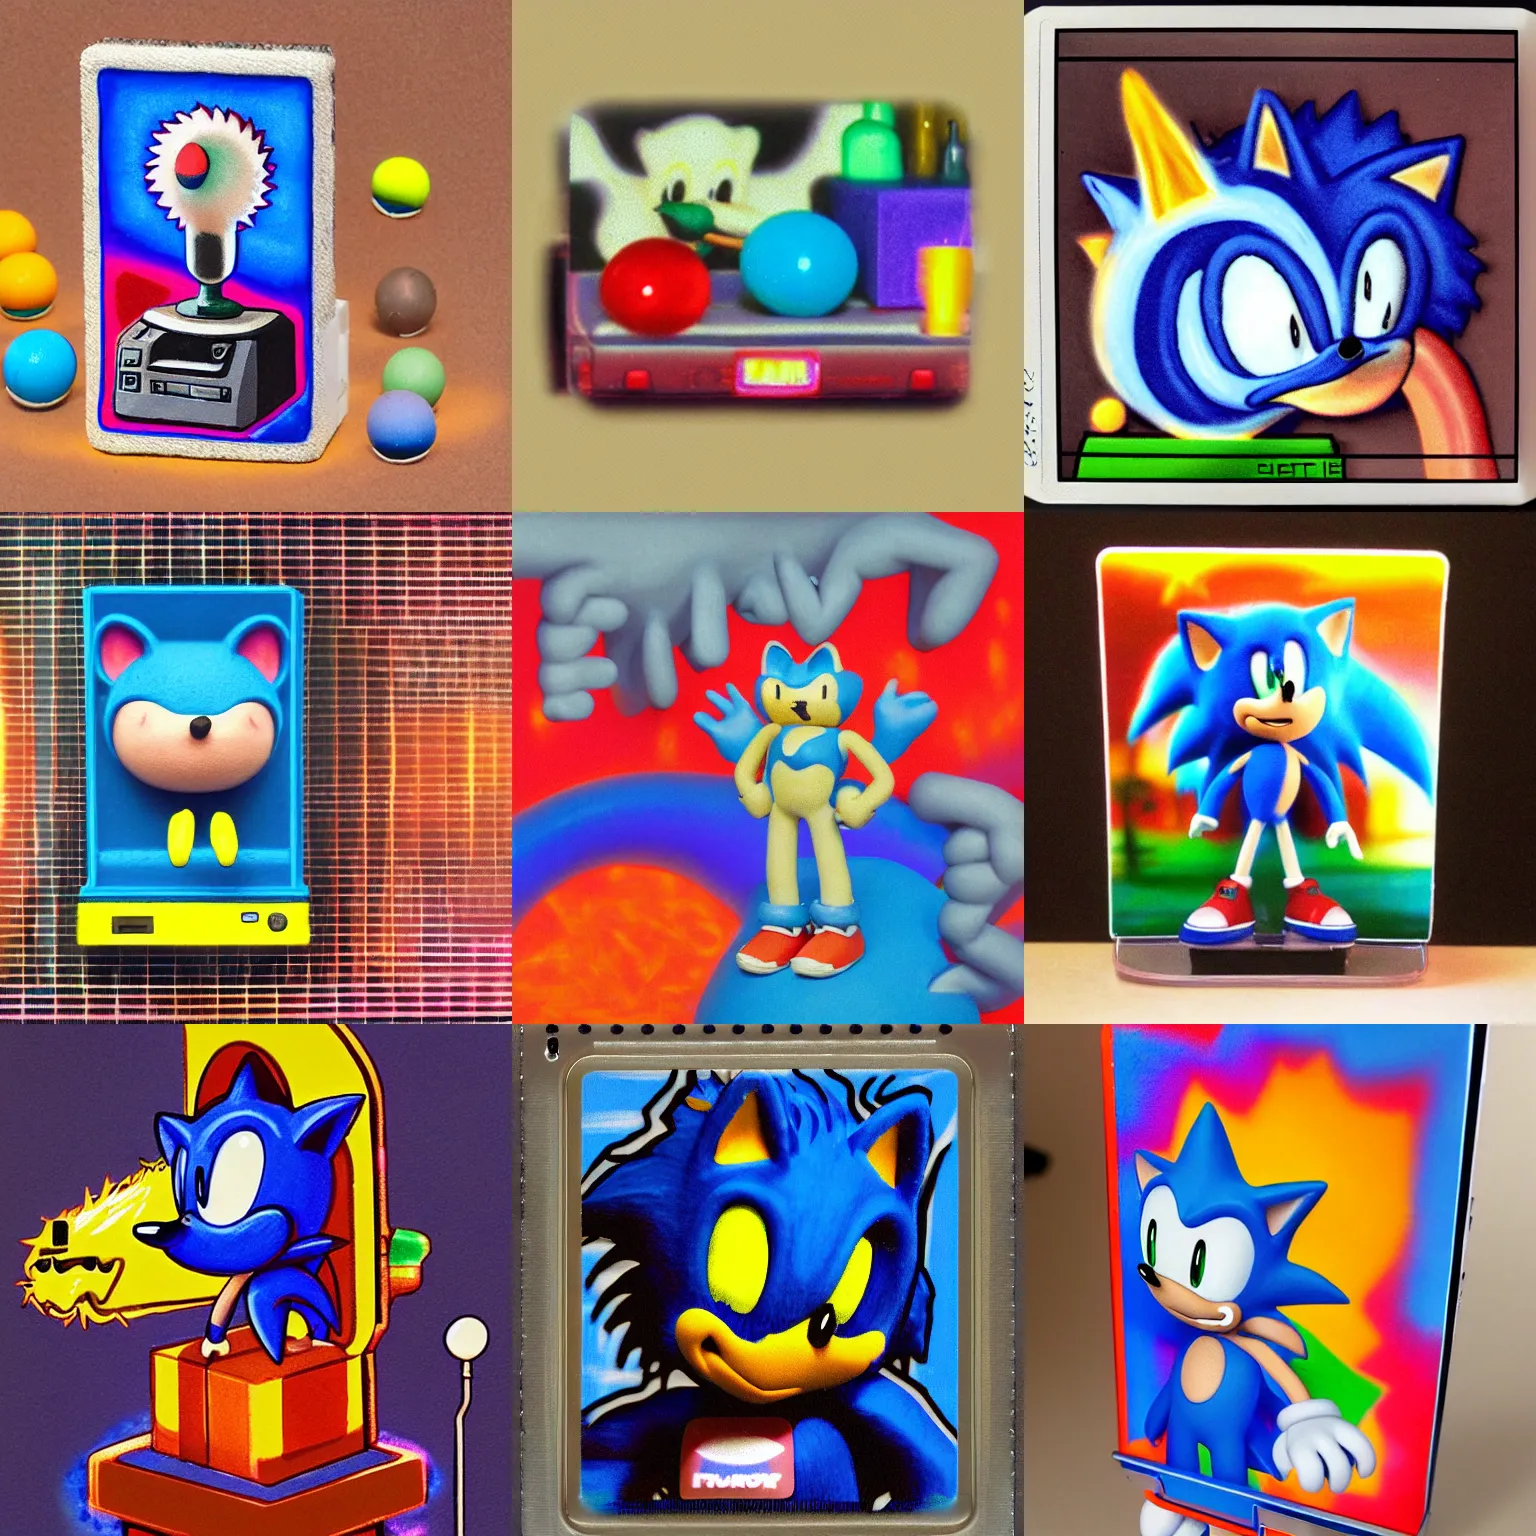 Prompt: clay stop motion claymation portrait of sonic hedgehog polaroid and surreal sharp, detailed professional soft pastels instax quality airbrush art lava lamp album cover liquid dissolving airbrush art lsd dmt sonic the hedgehog cyberspace lava lamp checkerboard matte painting 1 9 9 0 s 1 9 9 2 sega genesis rareware video game album cover